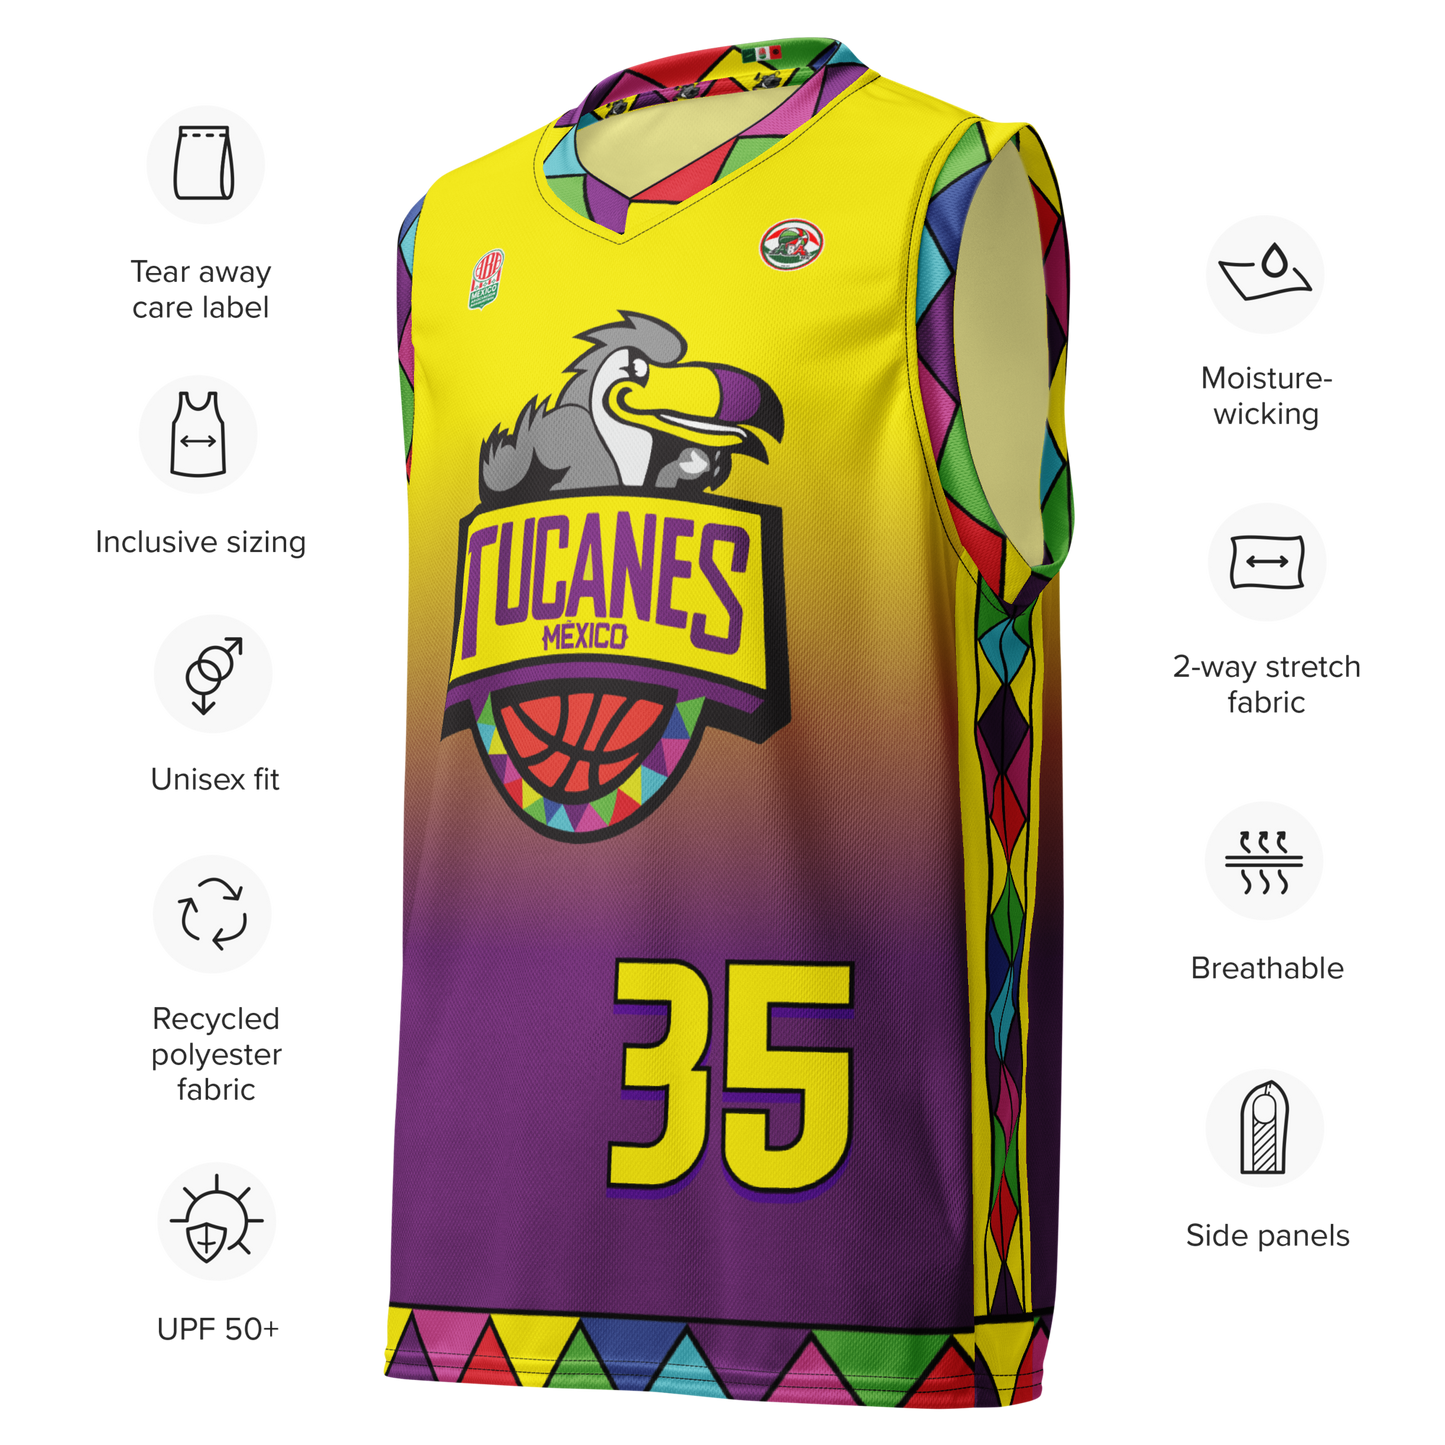 Frank Scott #35 Tucanes MX Basketball Jersey - Sunset Special Limited Edition!